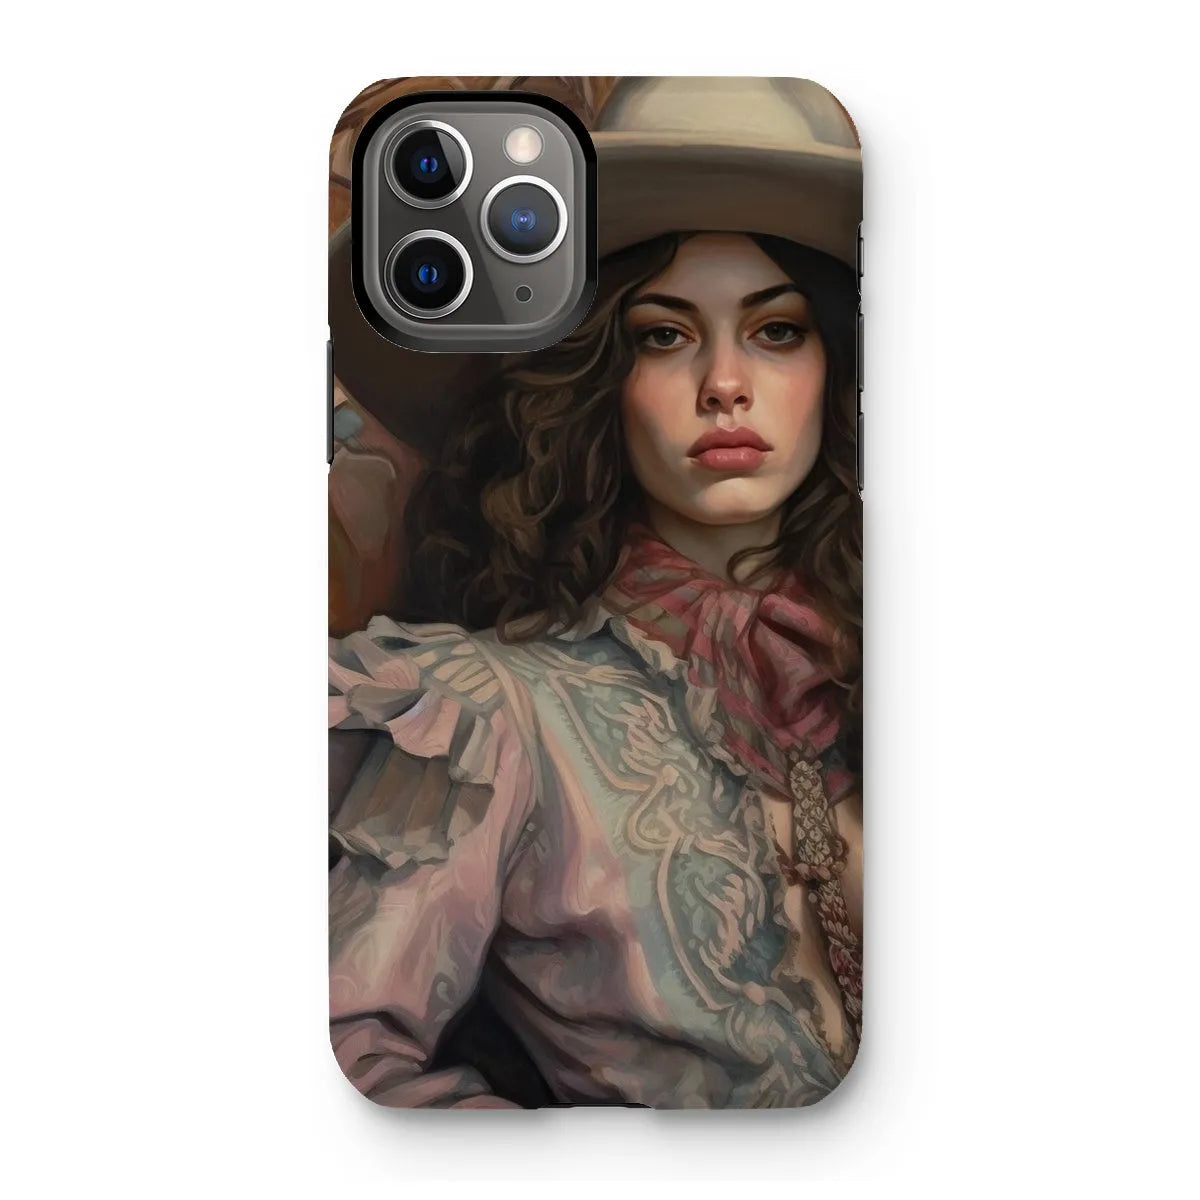 Alex The Lesbian Cowgirl - Sapphic Art Phone Case - Iphone 11 Pro / Matte - Mobile Phone Cases - Aesthetic Art